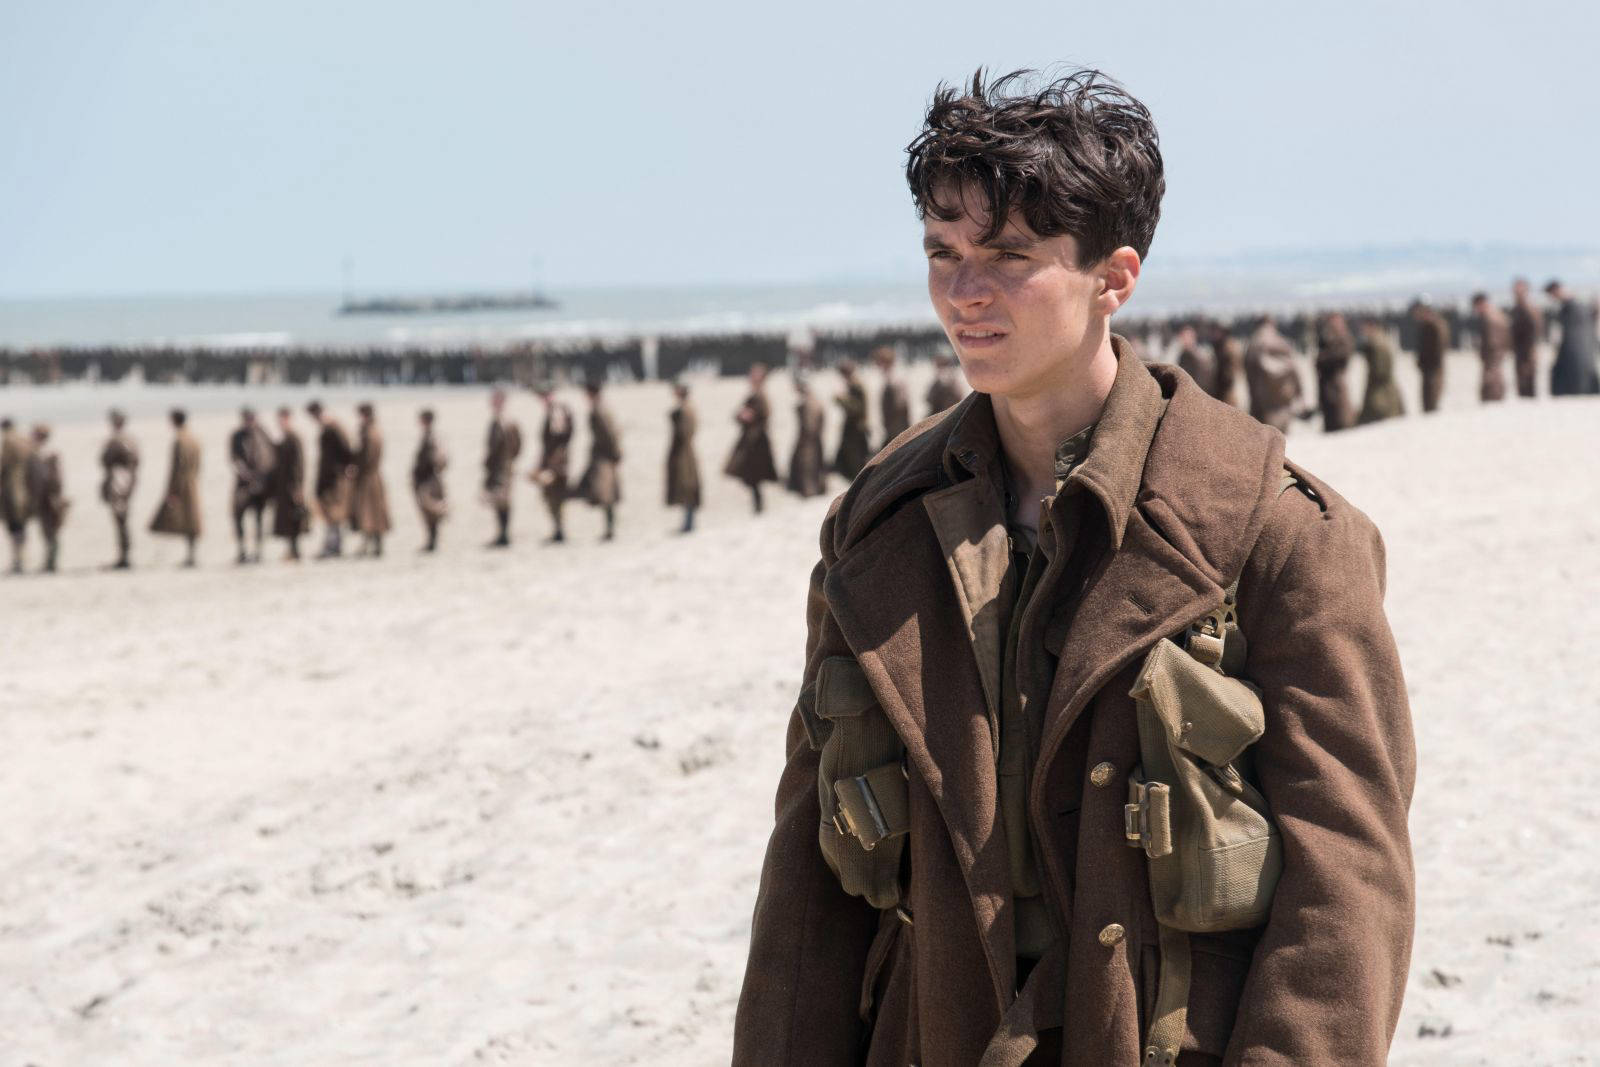 A shot from the movie Dunkirk